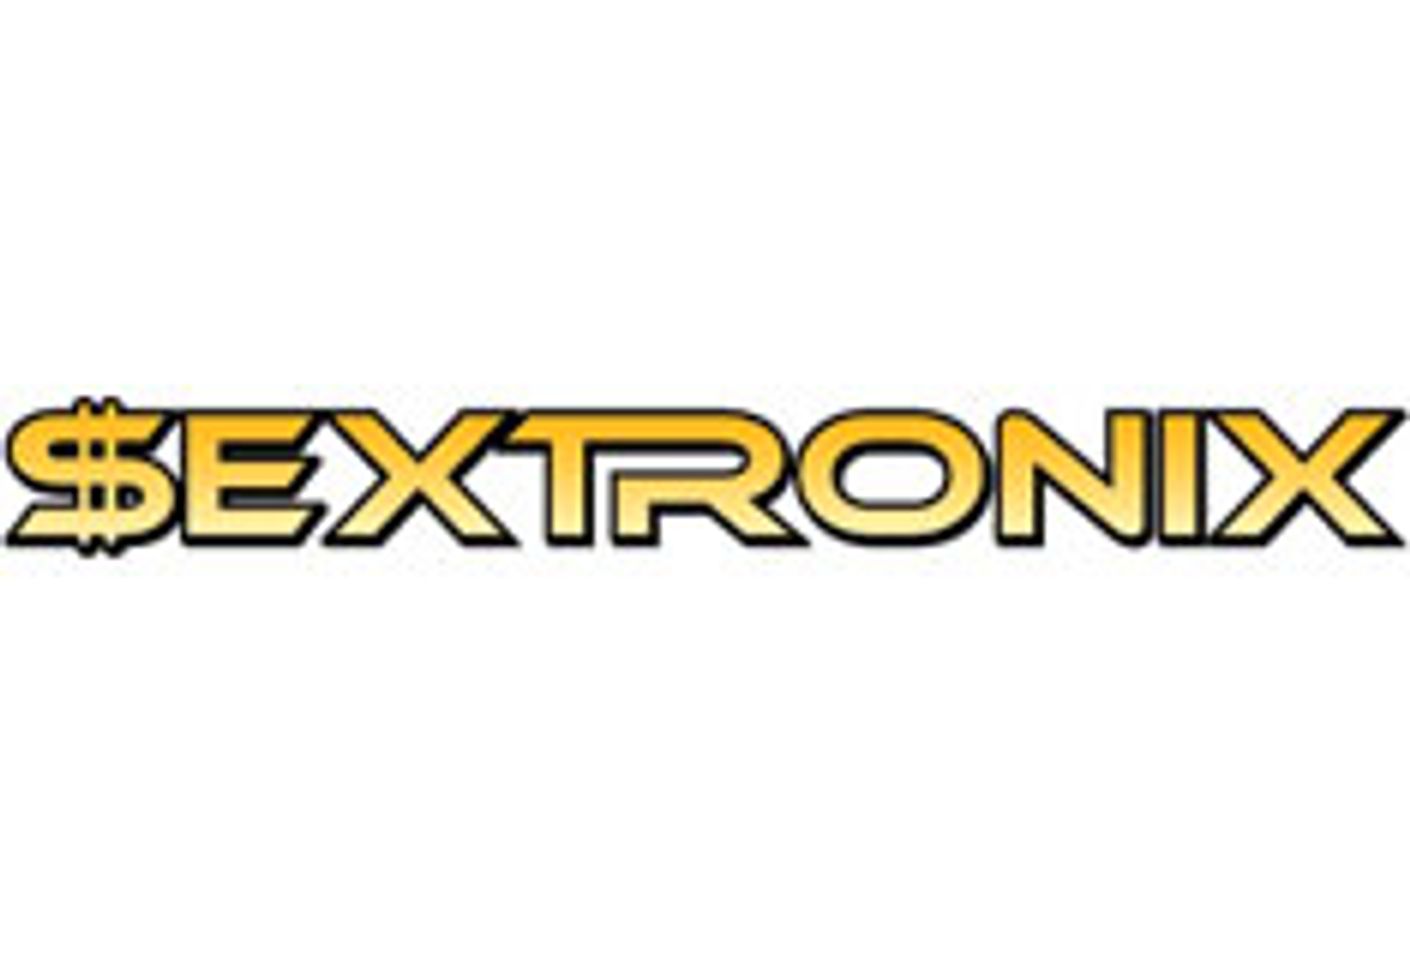 15 Years on, Sextronix Continues to Evolve